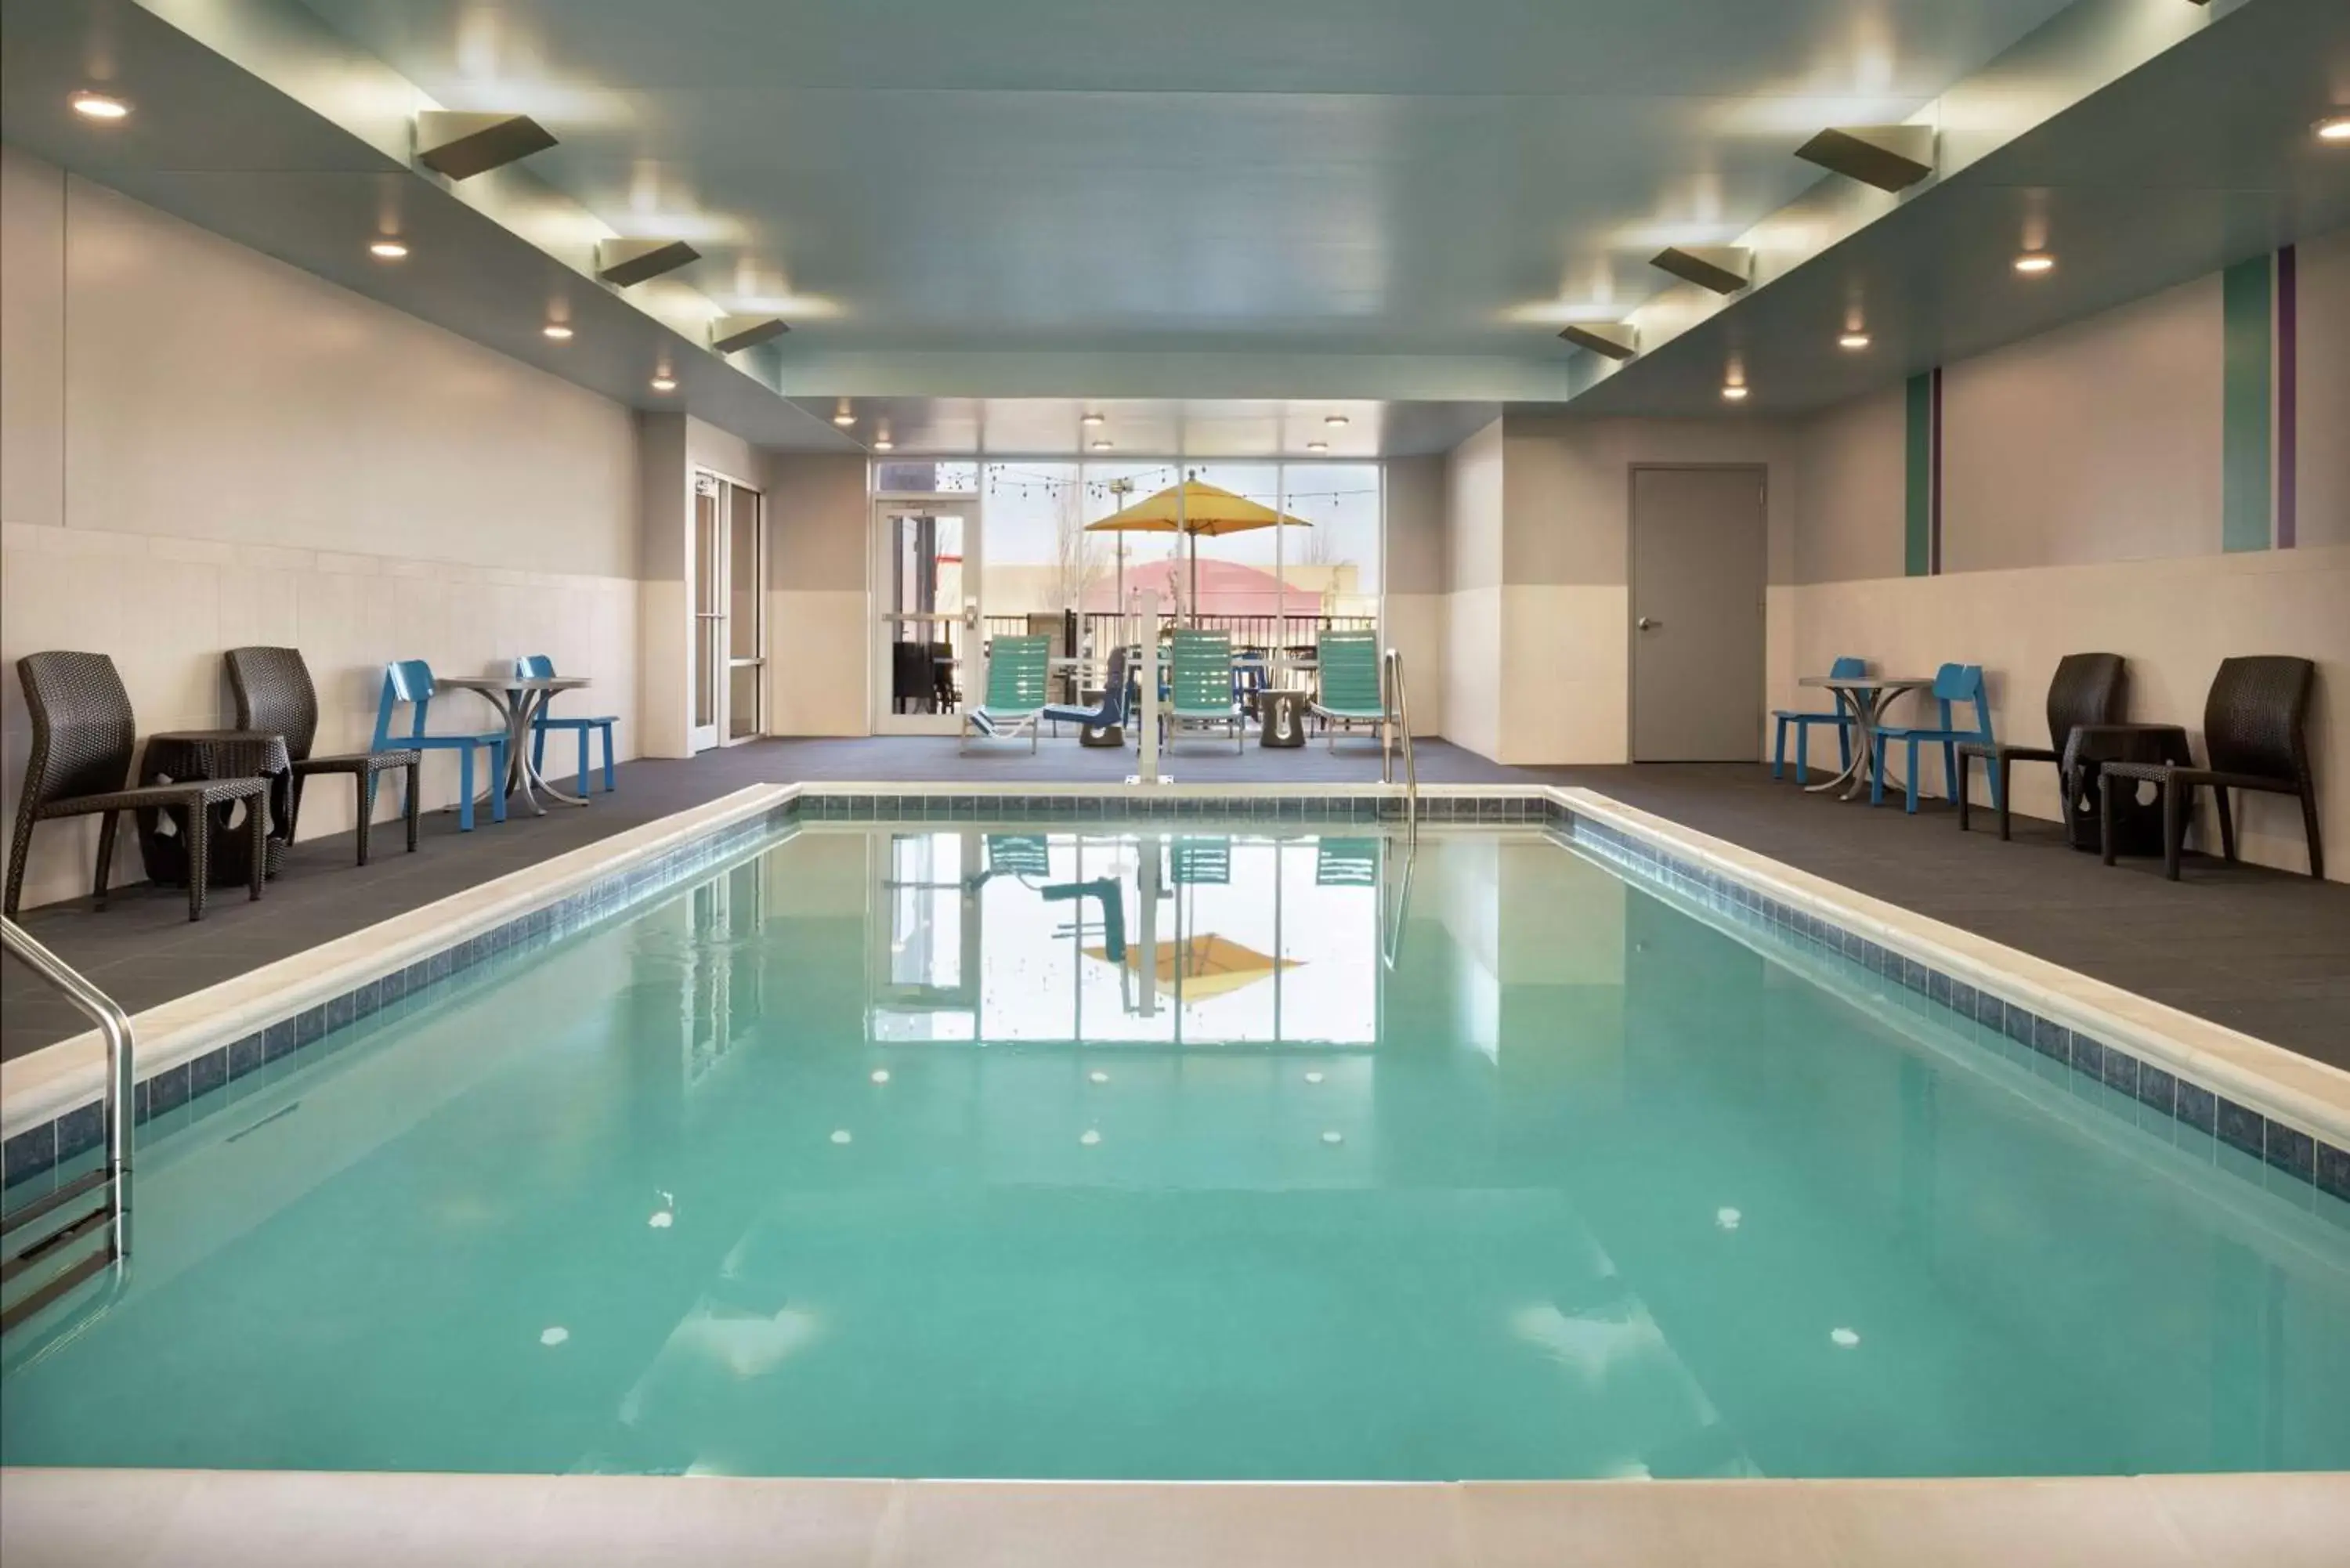 Pool view, Swimming Pool in Home2 Suites By Hilton Dayton/Beavercreek, Oh